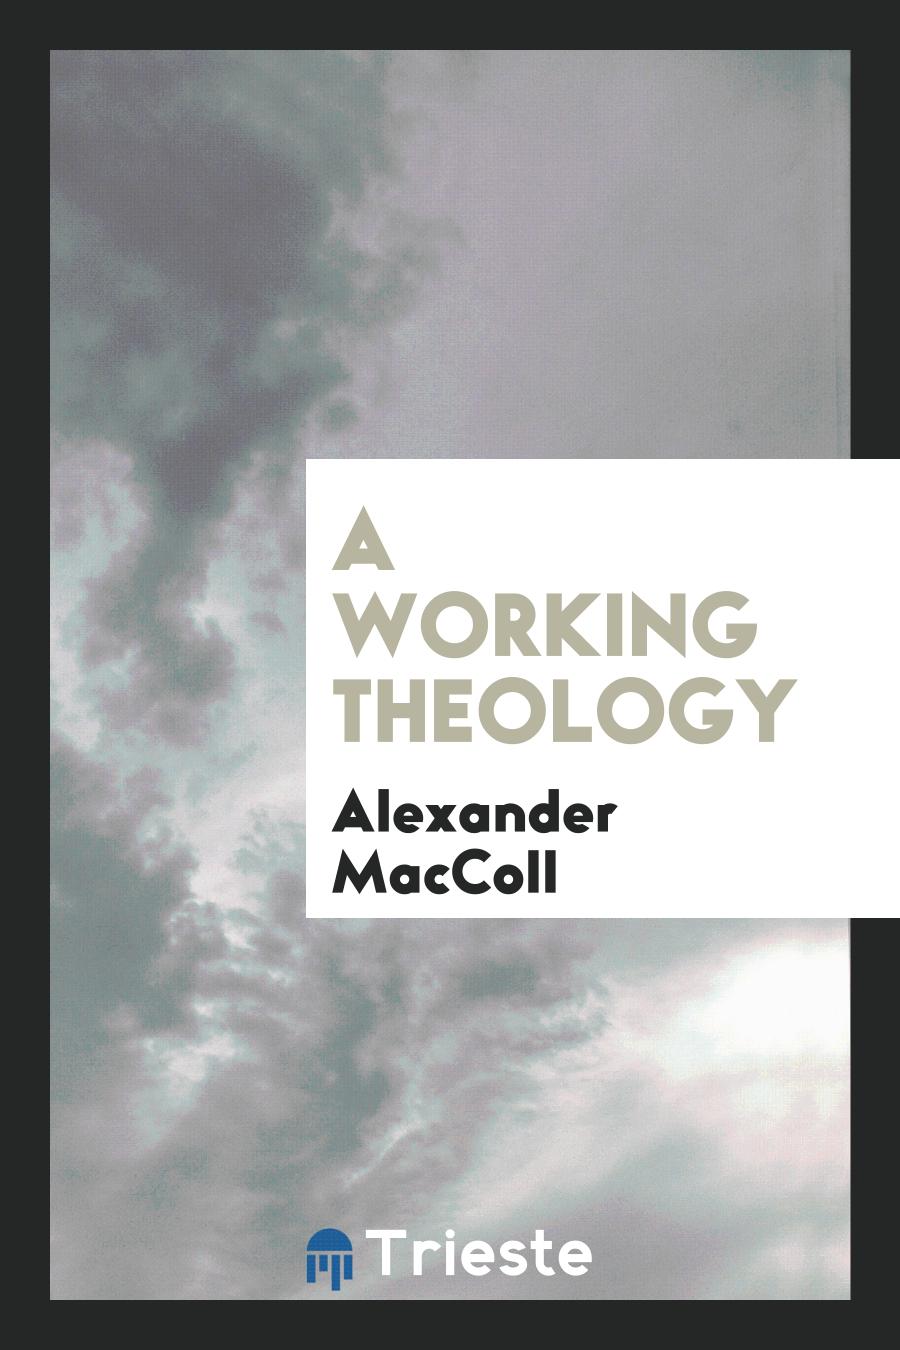 A Working Theology